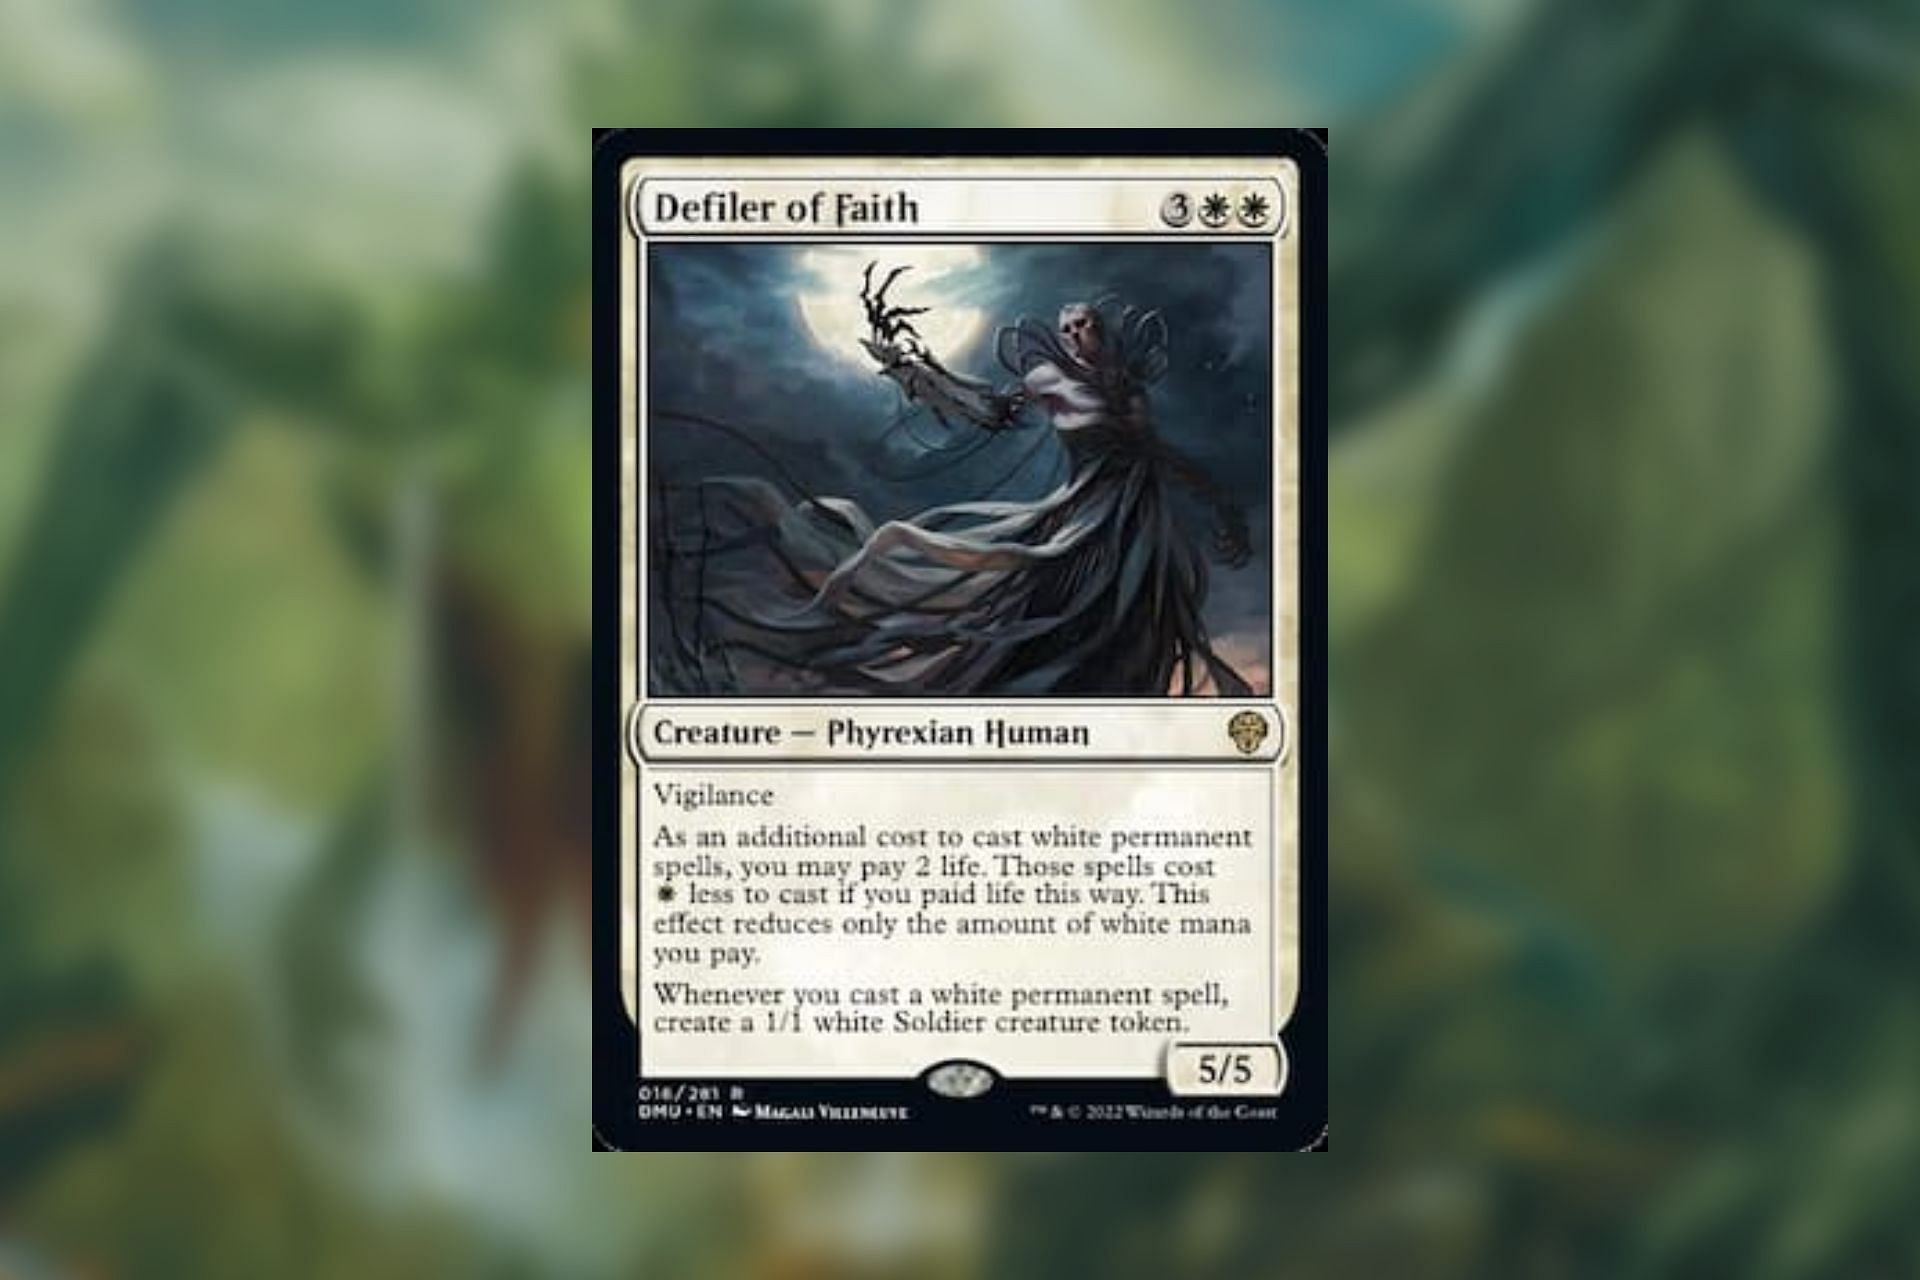 This Defiler helps with making Soldier tokens in Magic: The Gathering (Image via Wizards of the Coast)